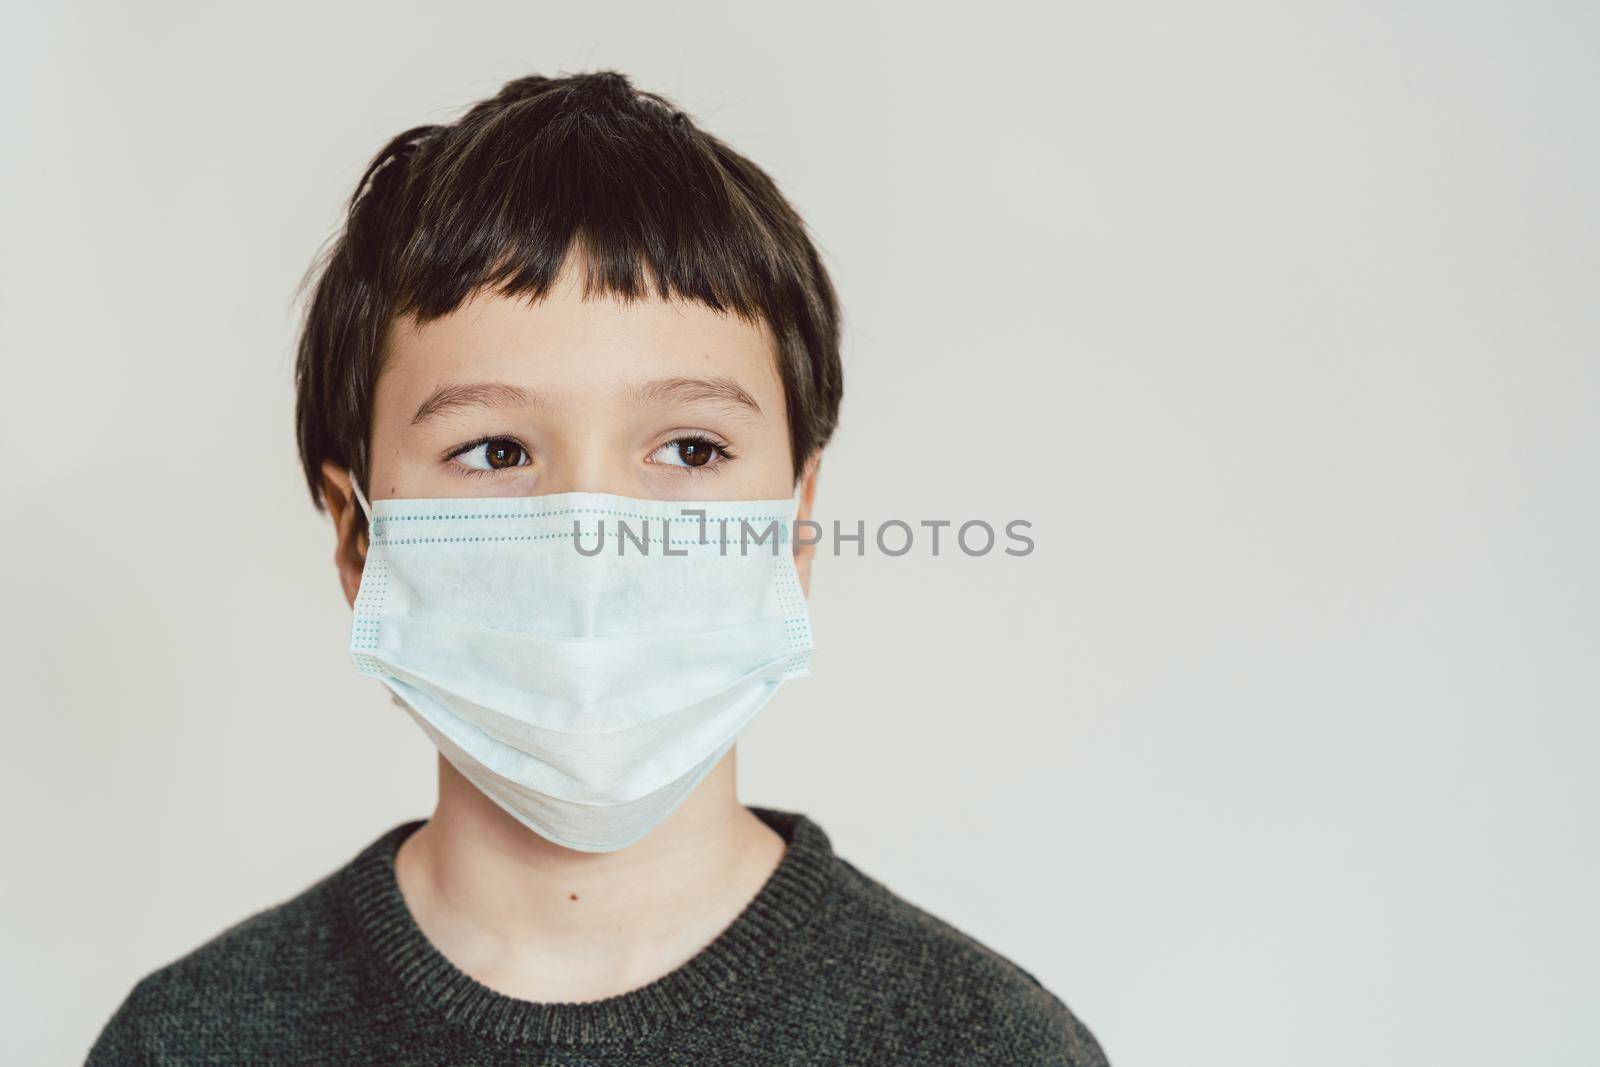 Young boy wearing face mask during Covid-19 crisis staying at home